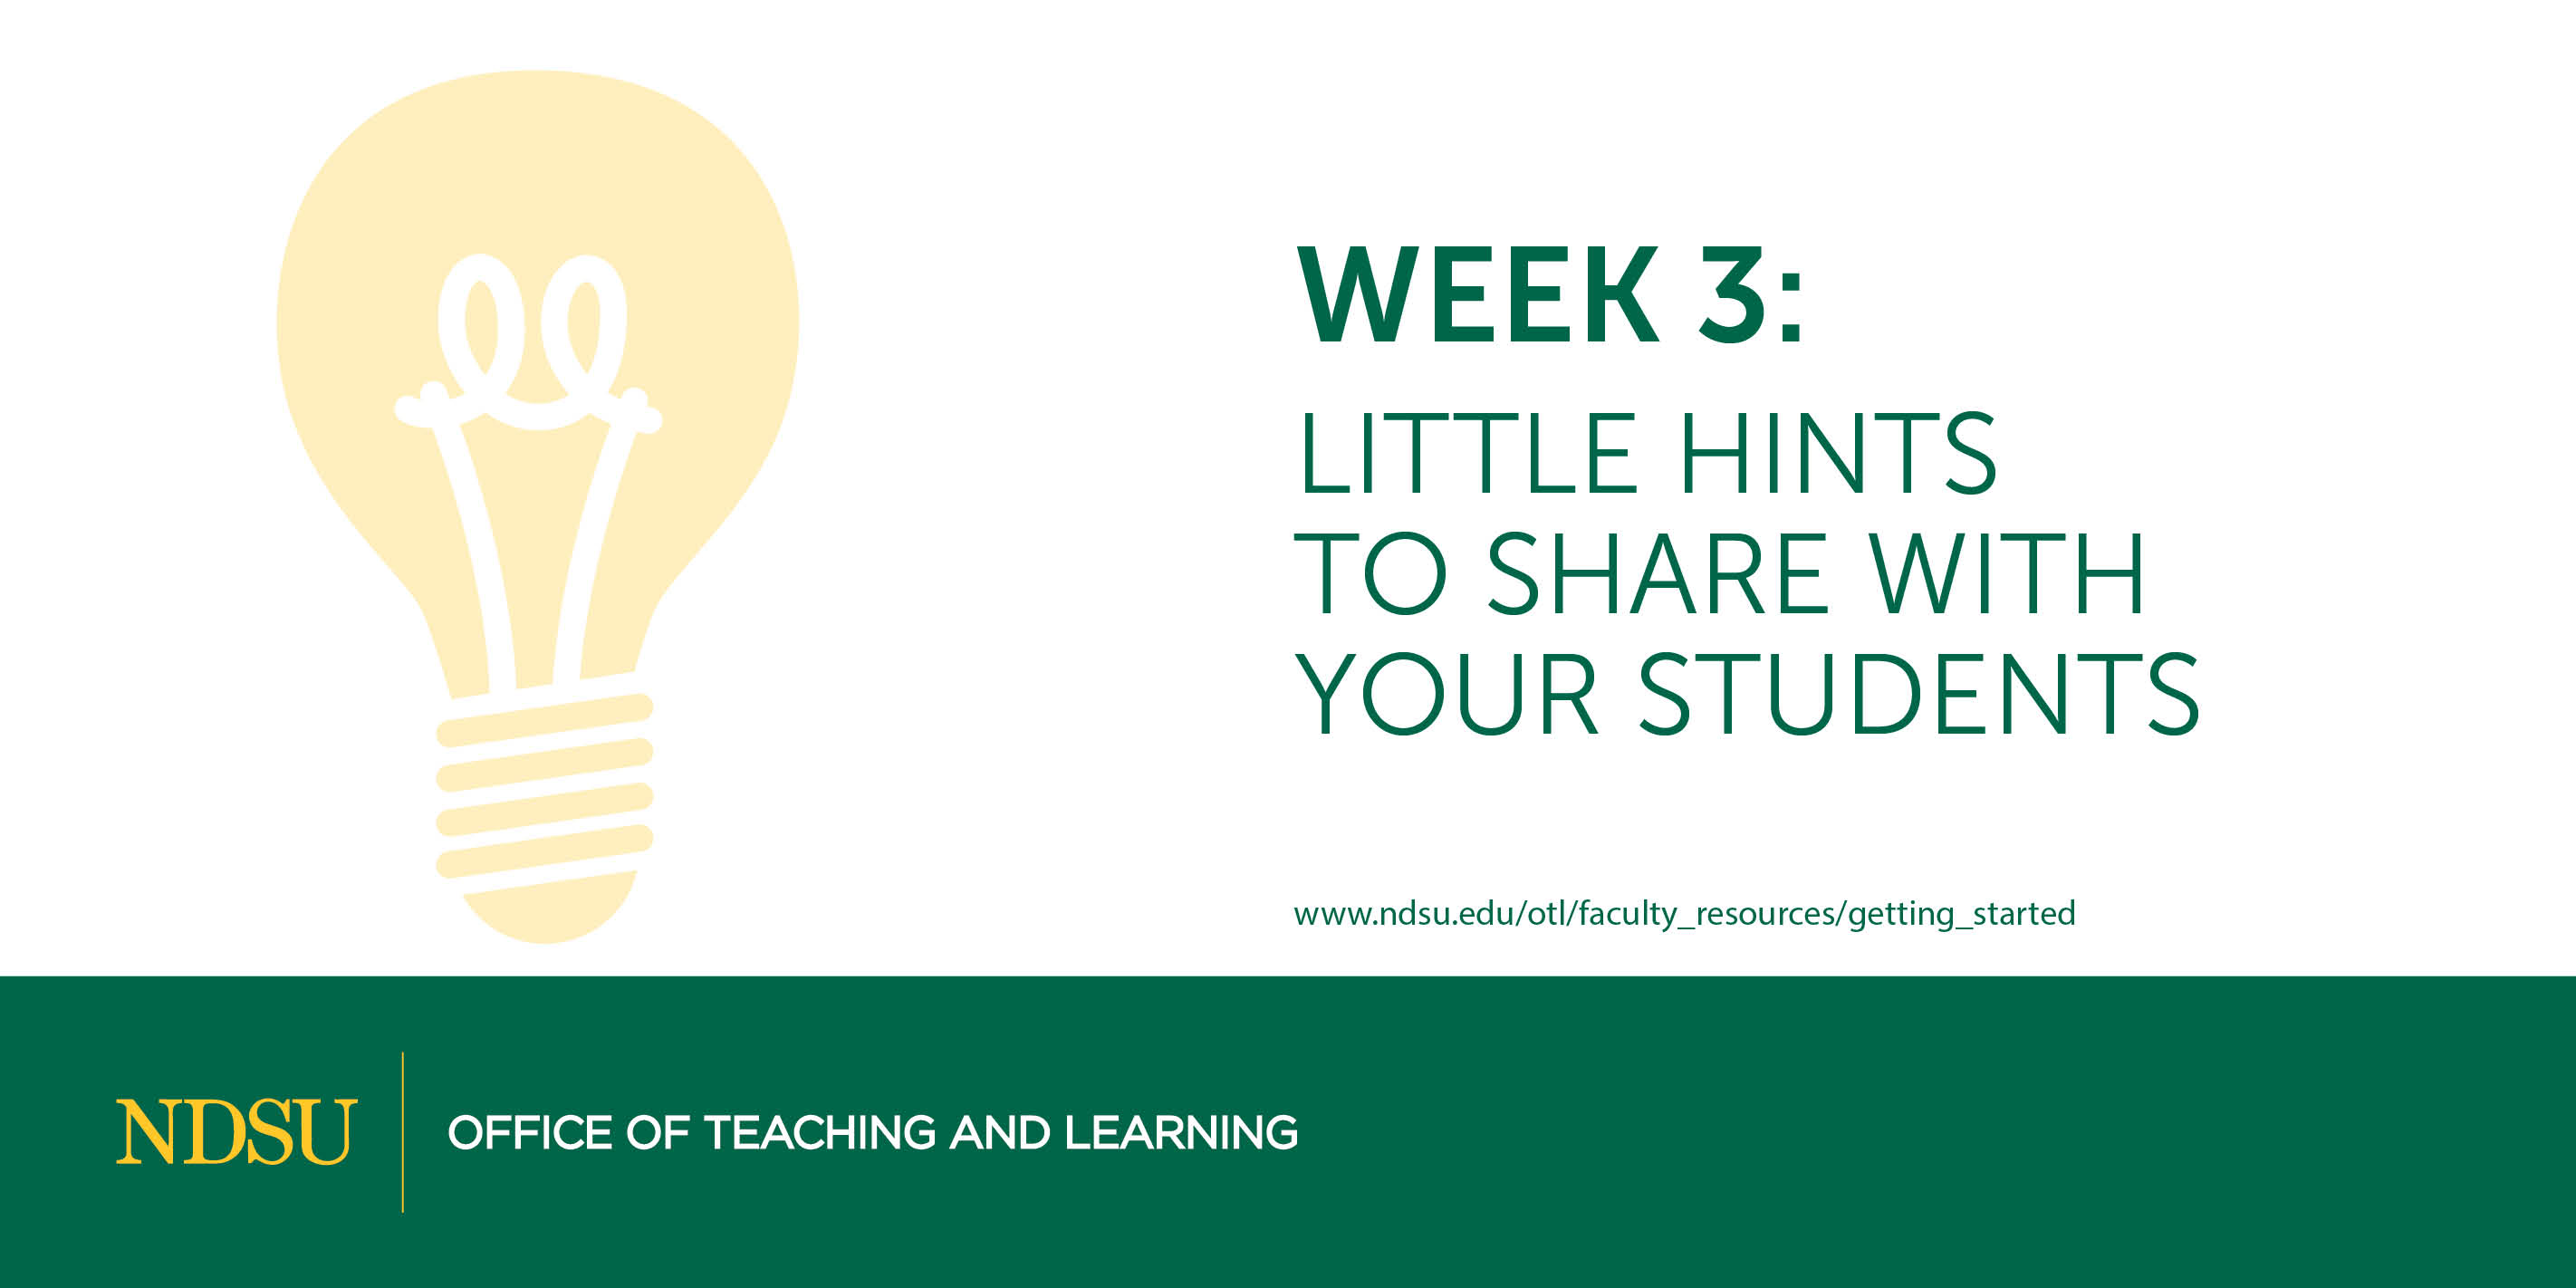 Week 3: Little Hints for Students